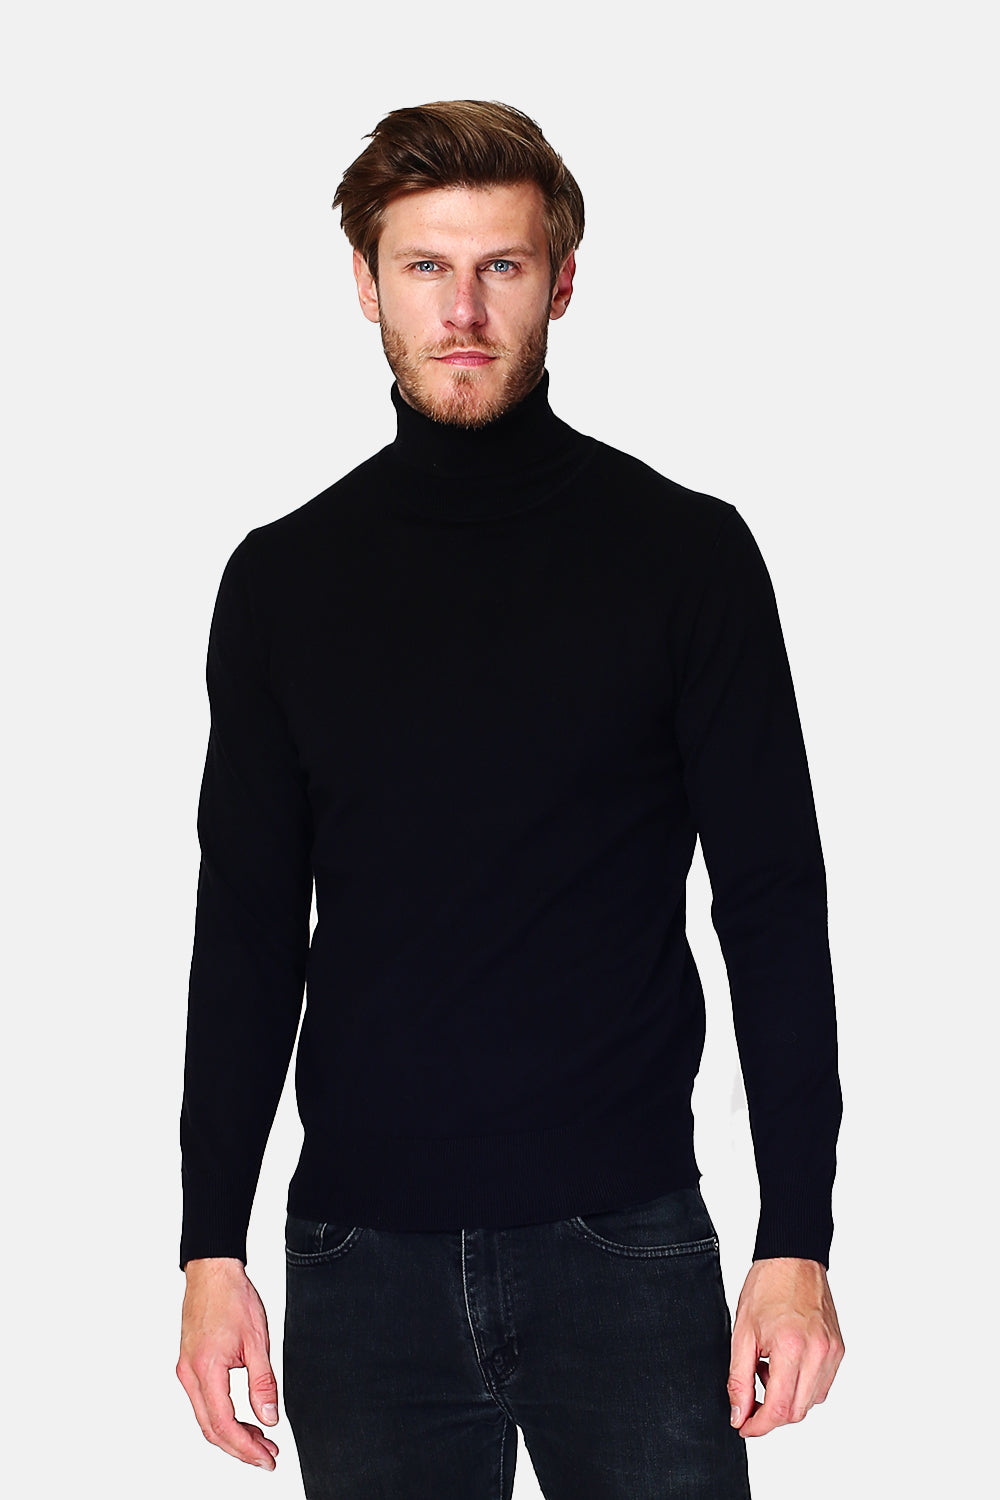 Classic turtleneck sweater with long sleeves knit in 3 threads